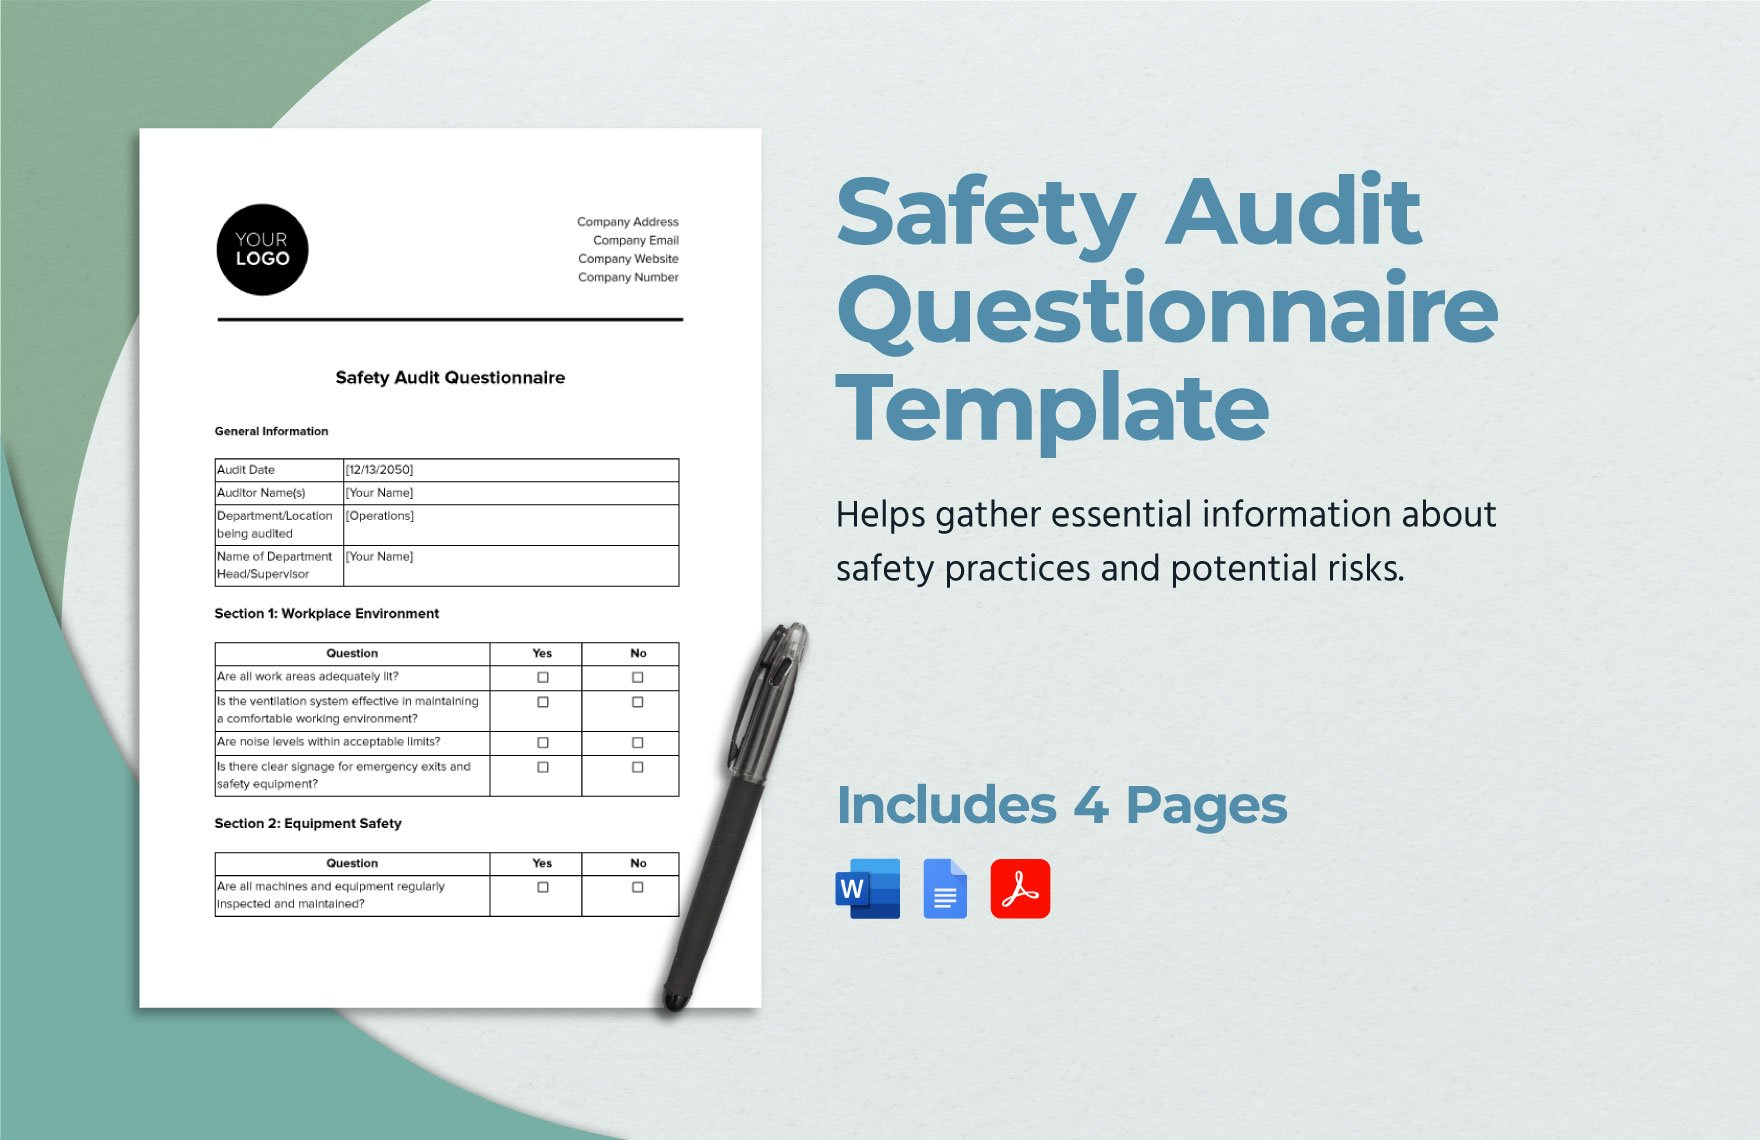 Safety Audit Questionnaire Template in Word, Google Docs, PDF